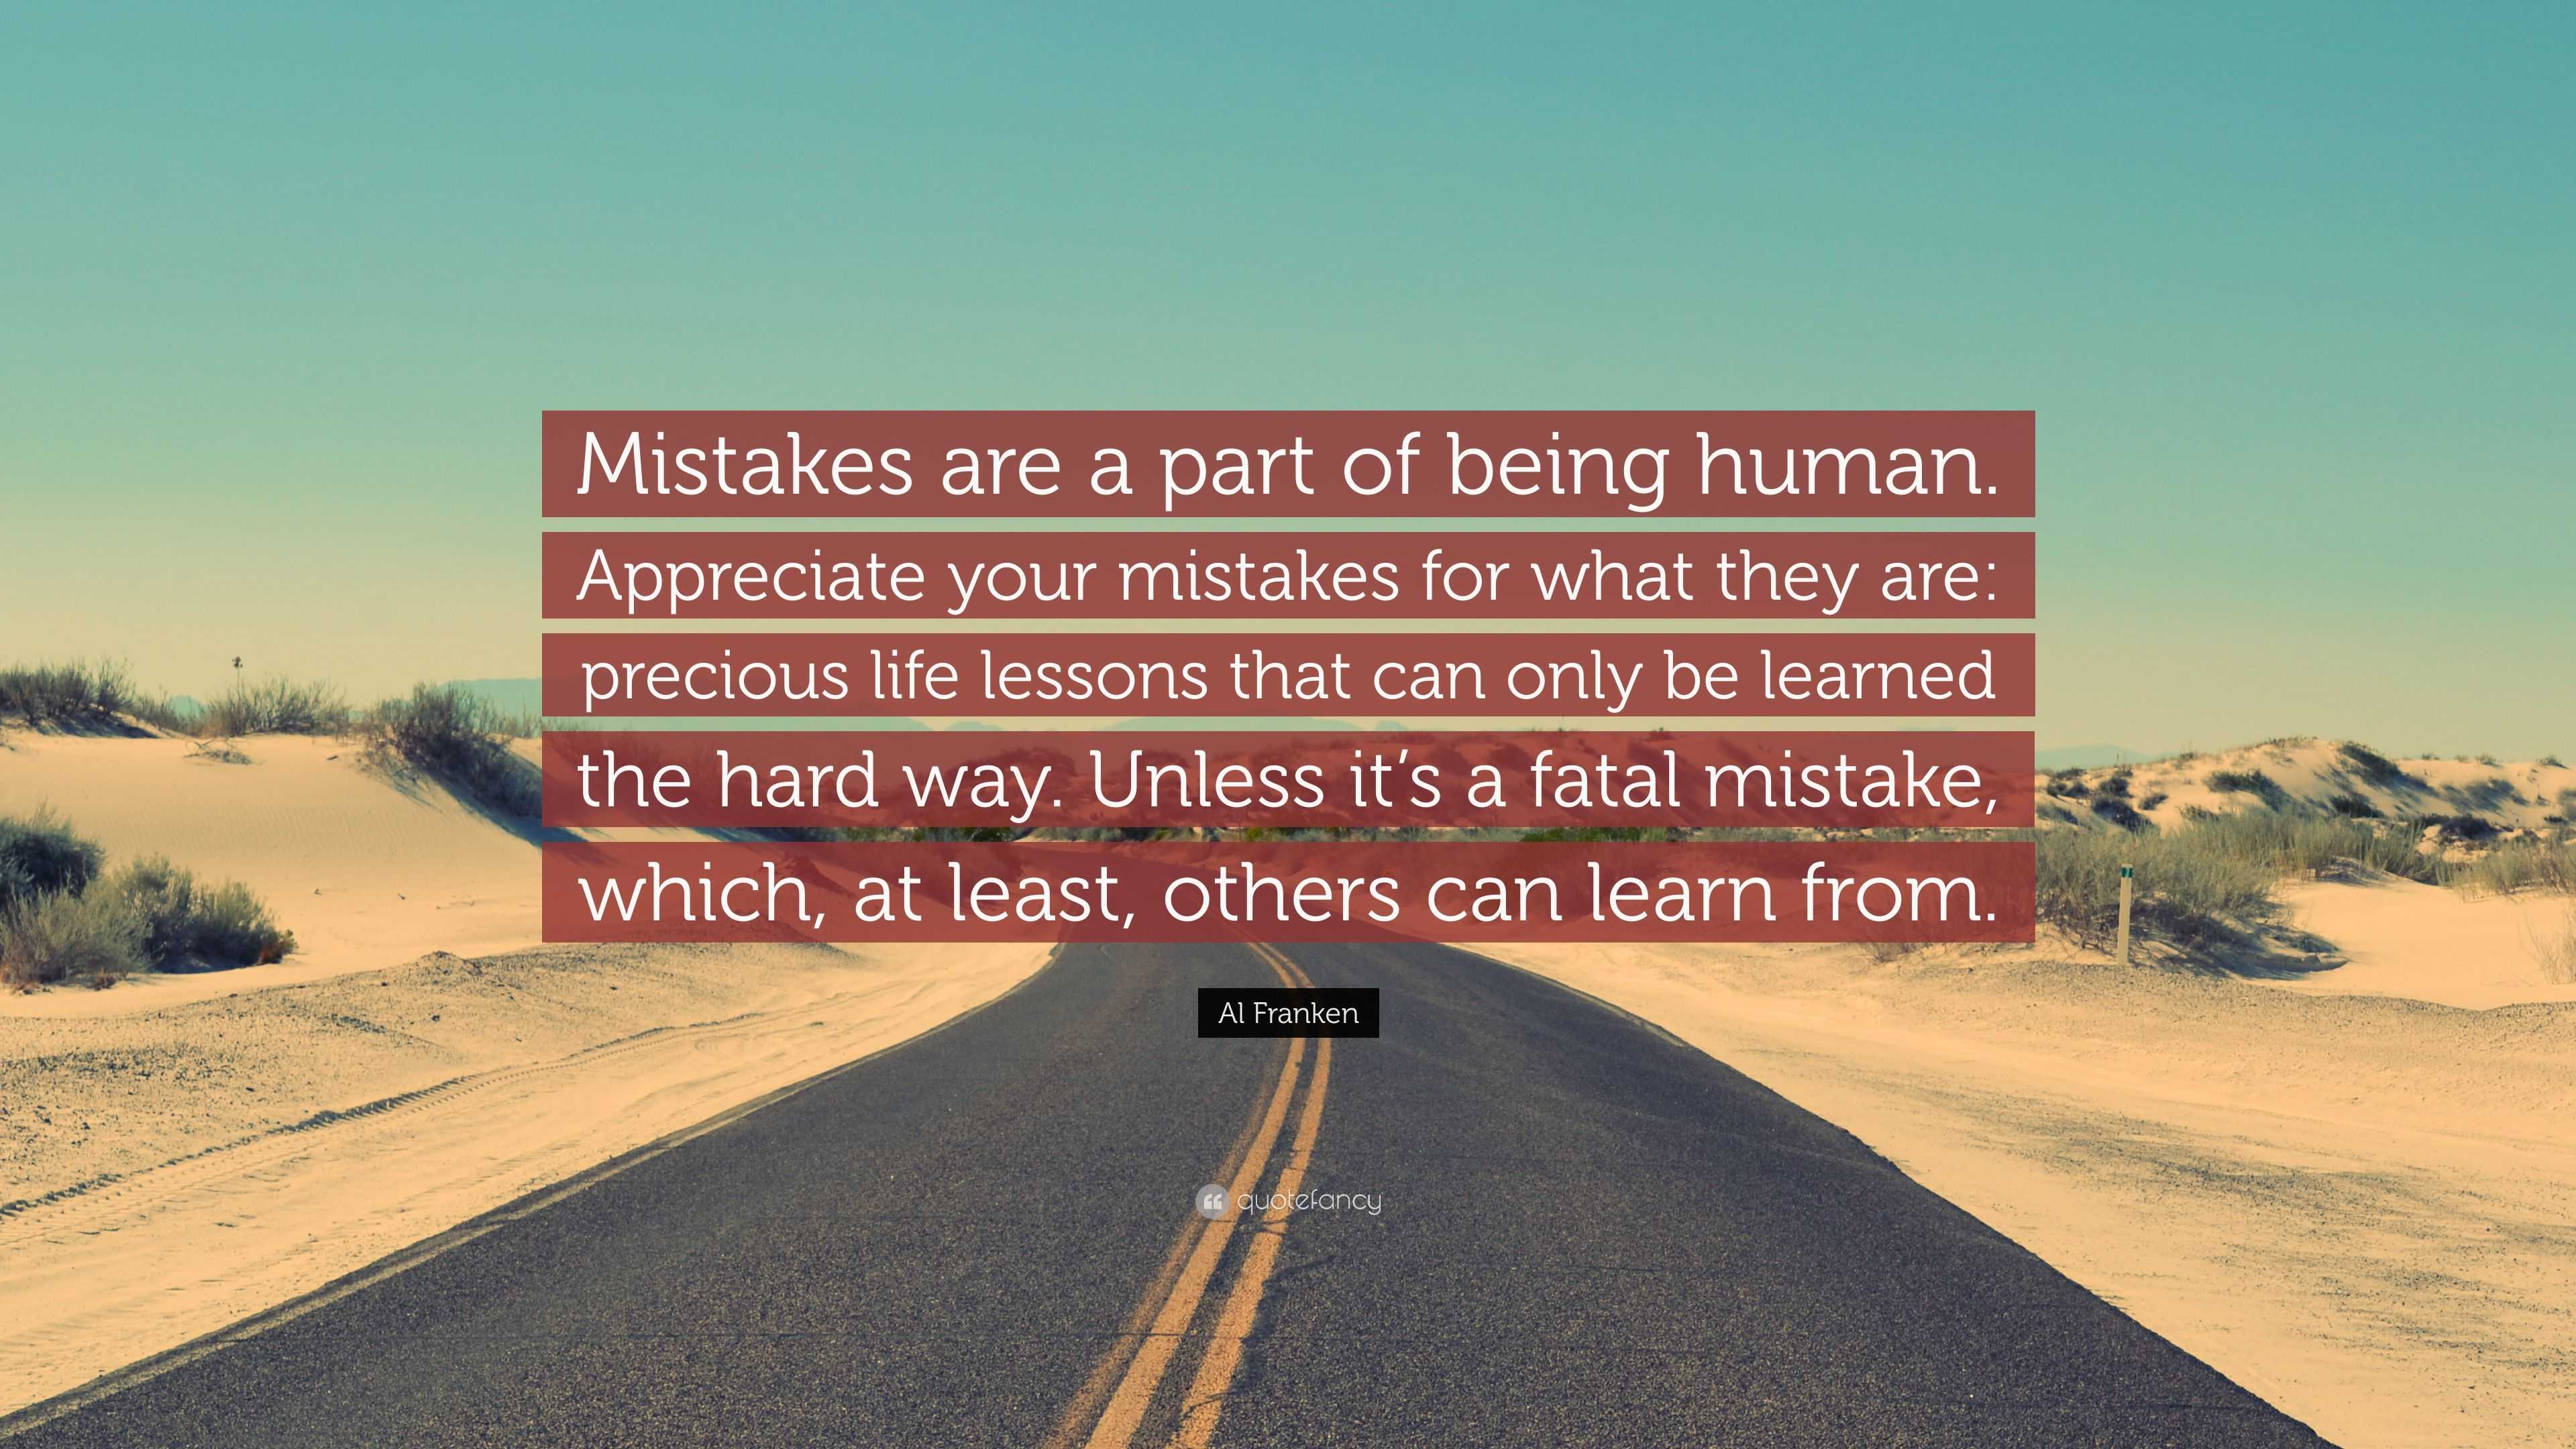 Al Franken quote: Mistakes are a part of being human. Appreciate